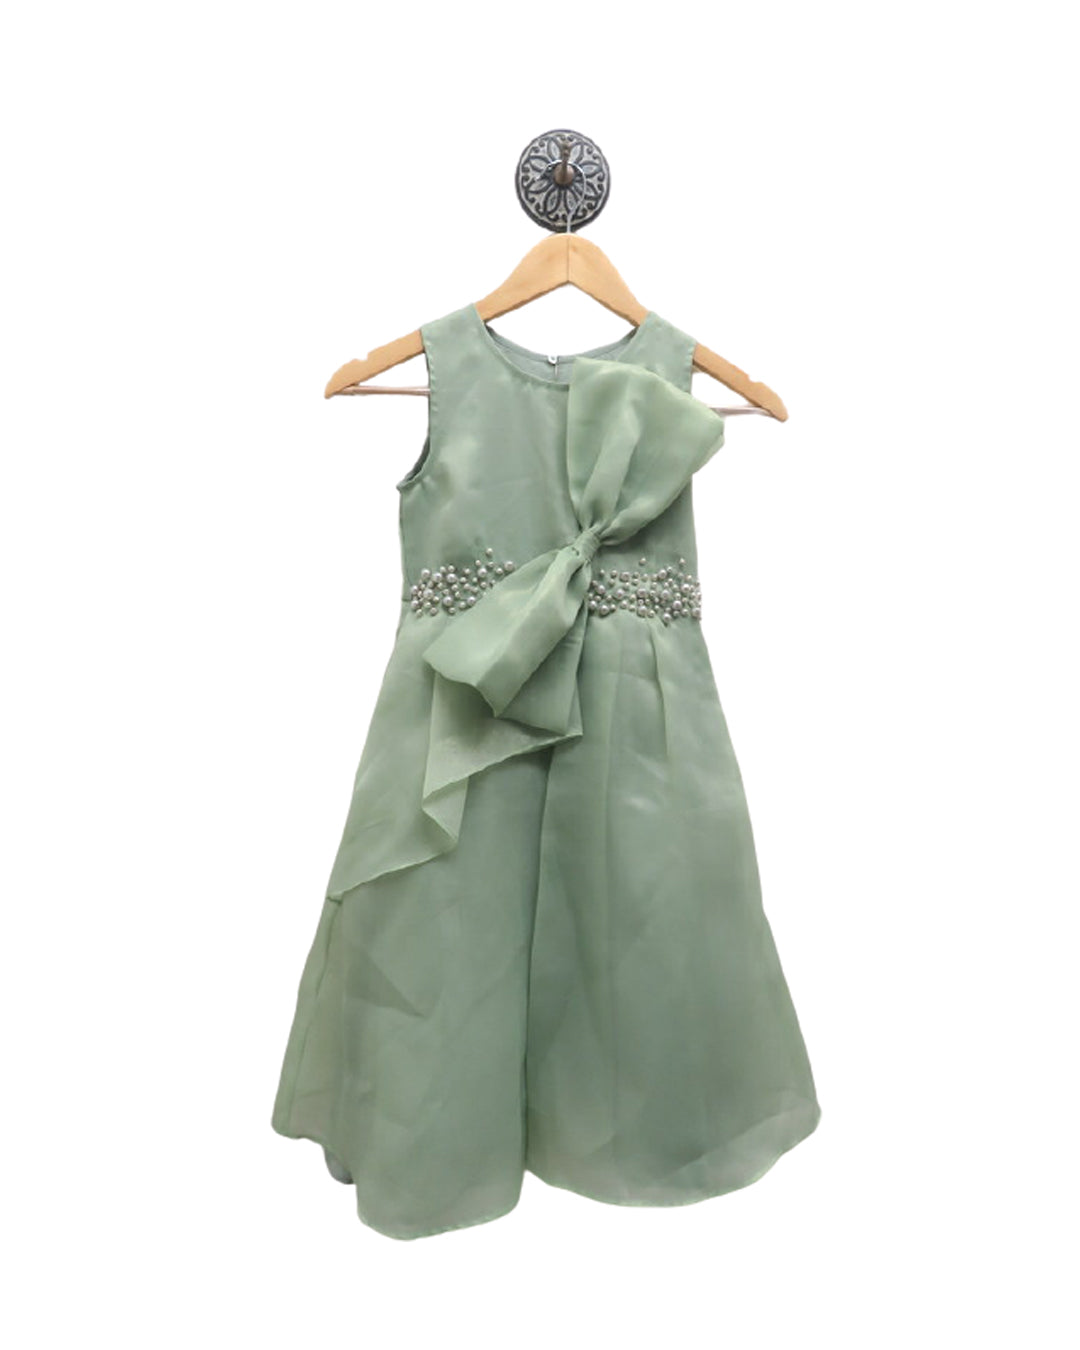 MINT GREEN PARTY DRESS WITH PEARL EMBELLISHMENT